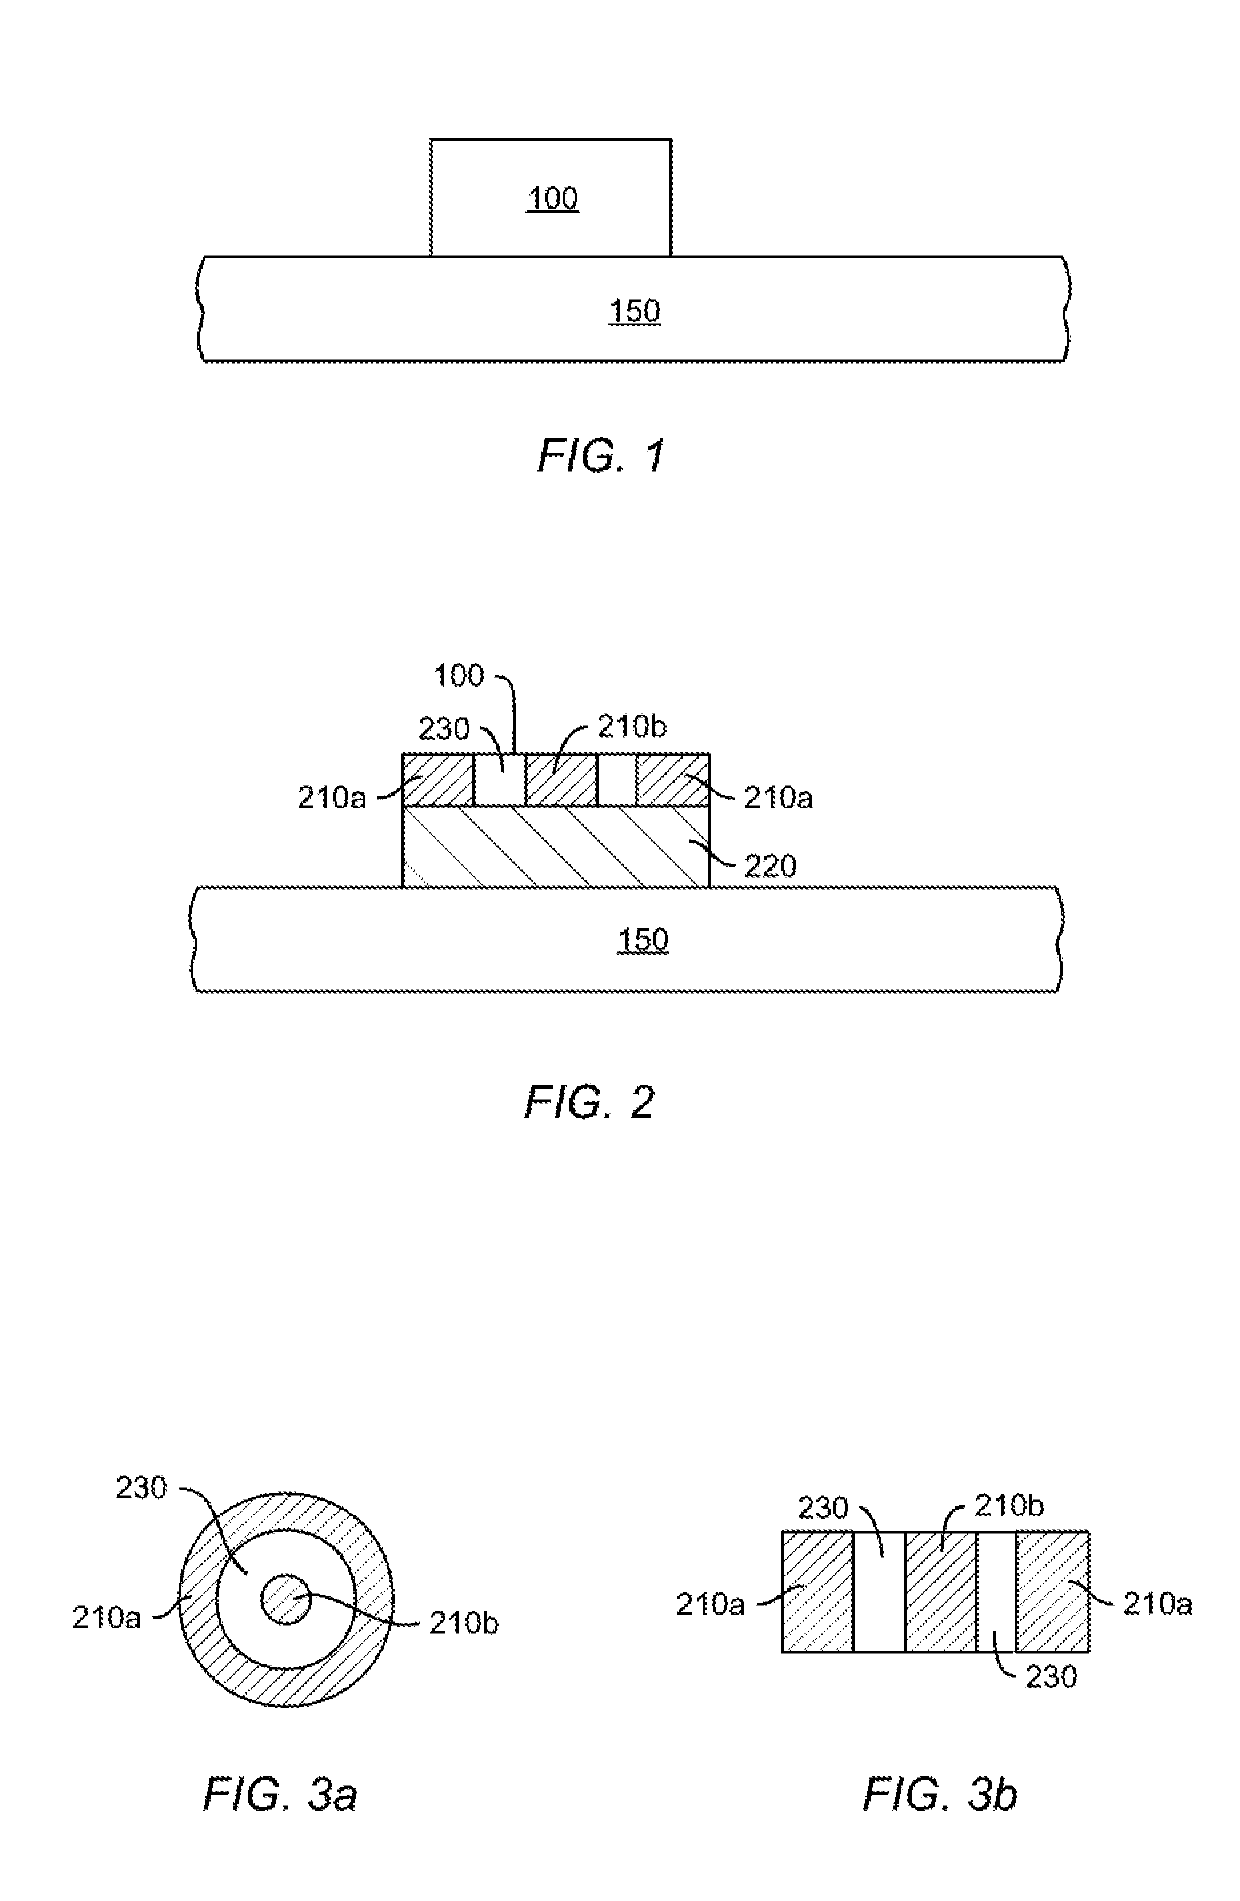 Probe for non-intrusively detecting imperfections in a test object